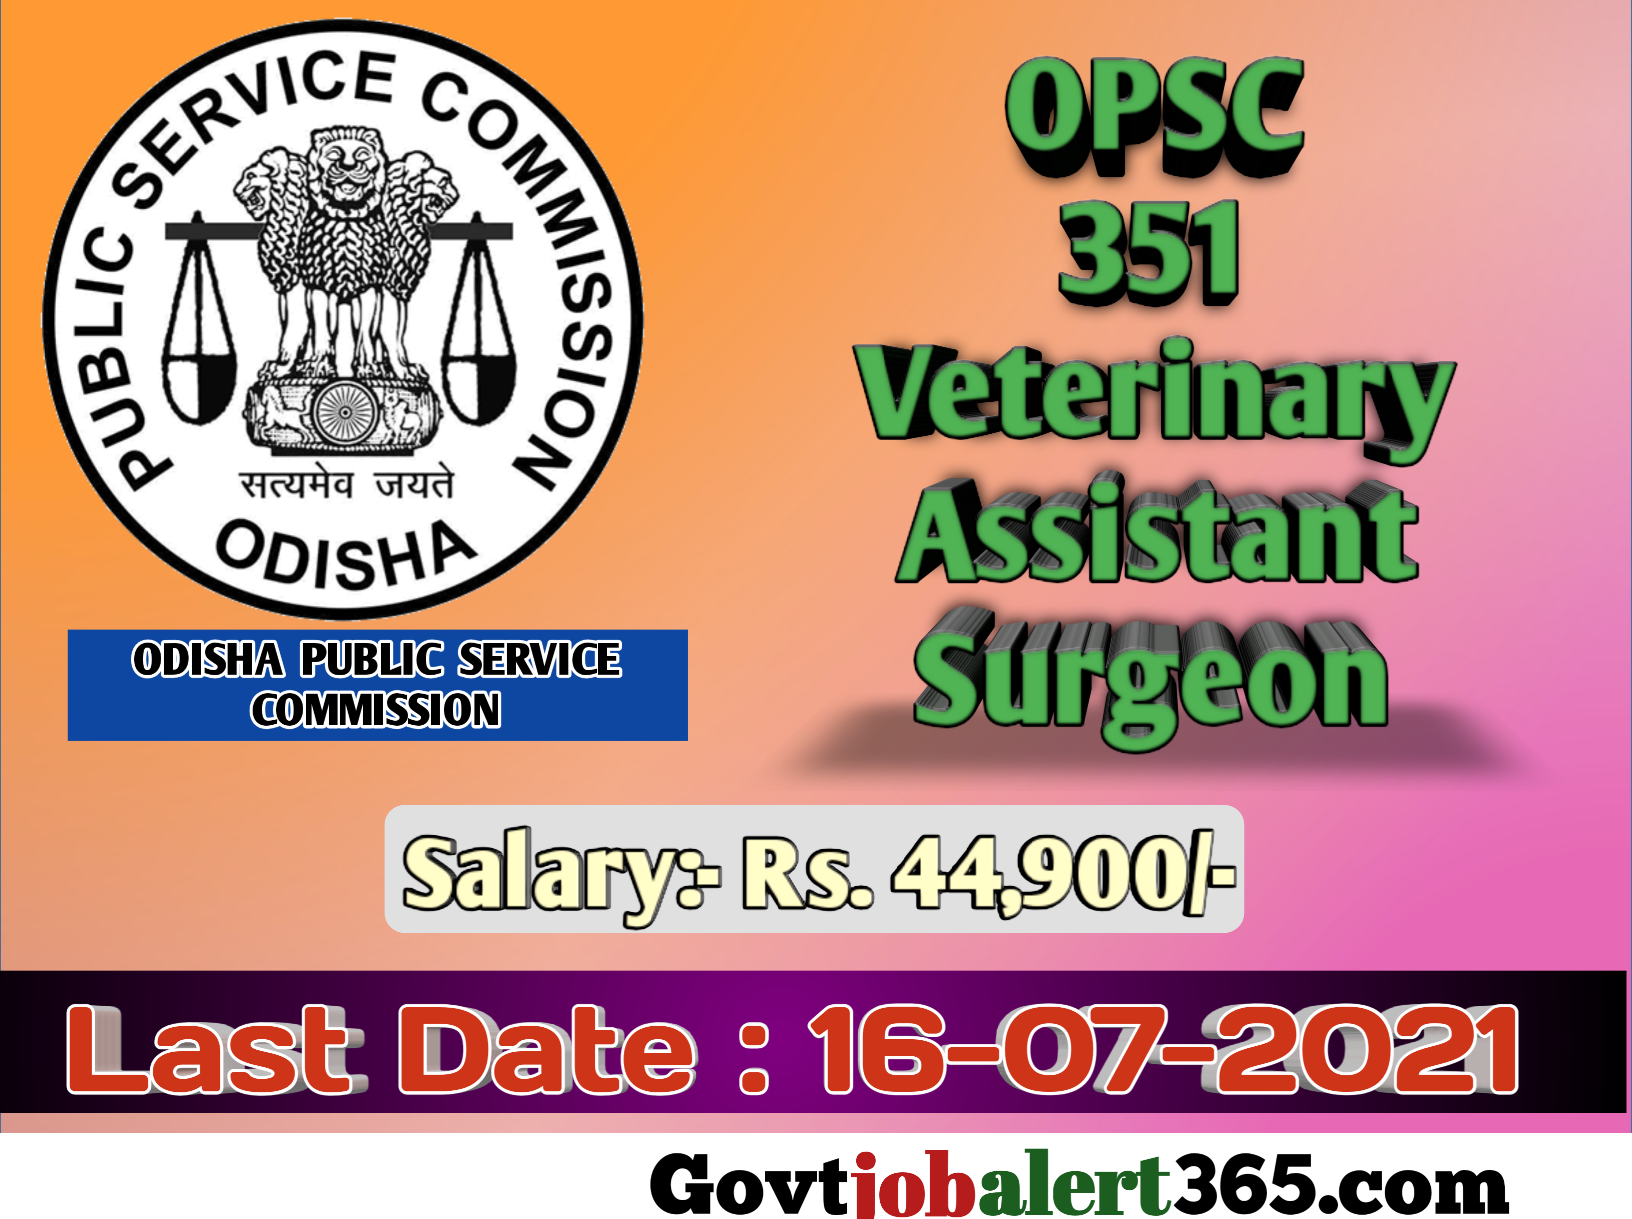 OPSC Veterinary Assistant Surgeon Recruitment 2021